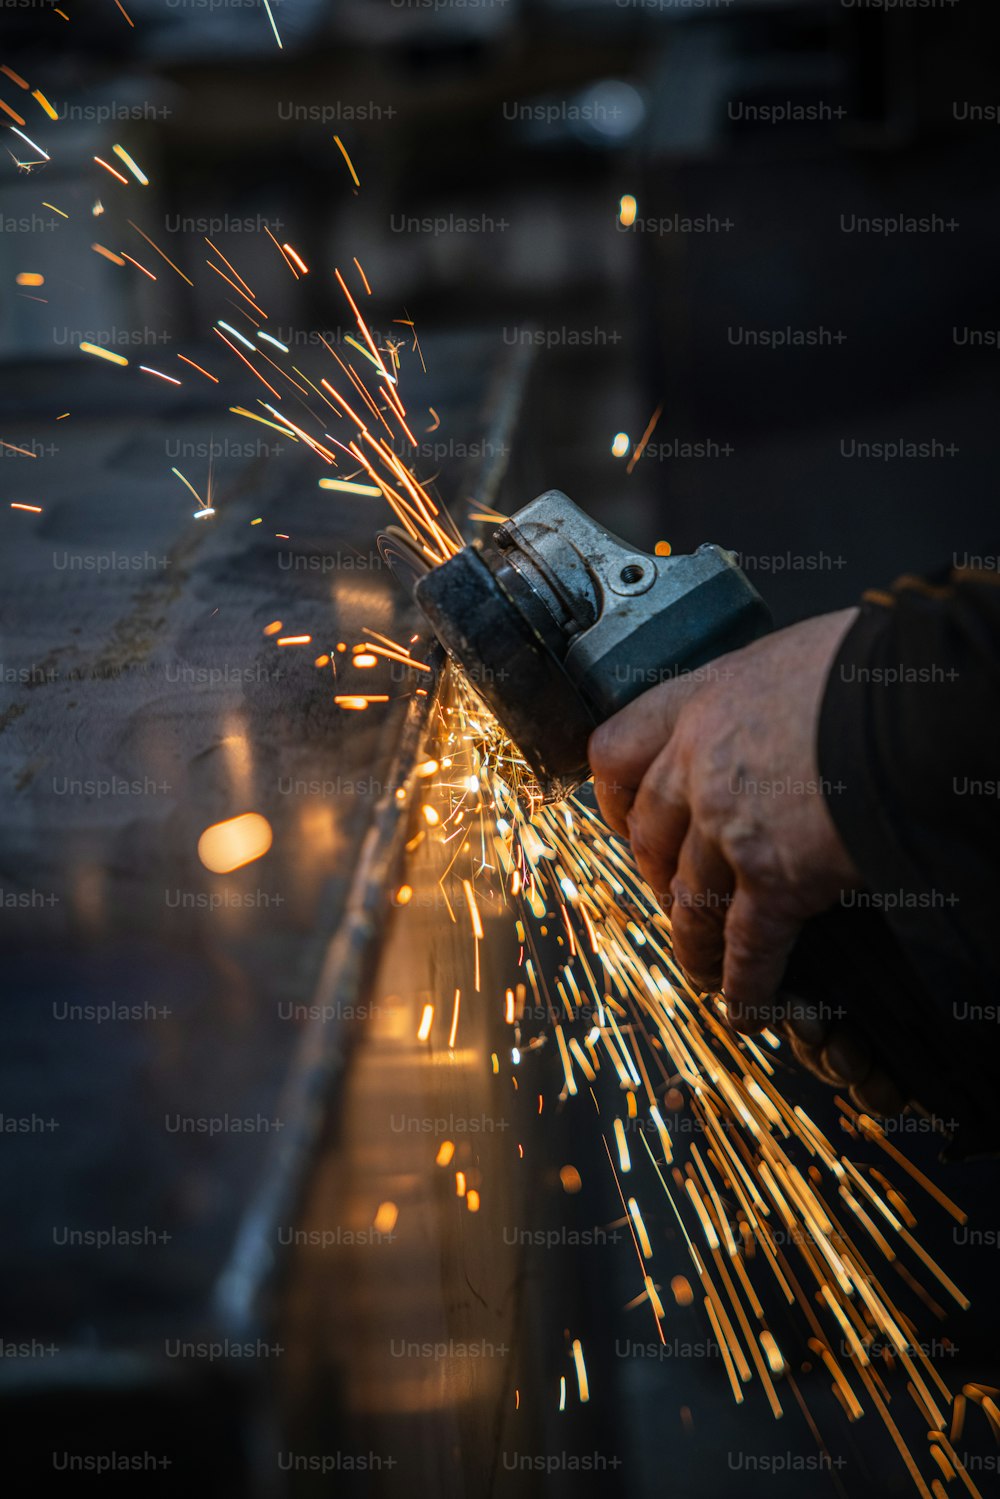 a person using a grinder on a piece of metal